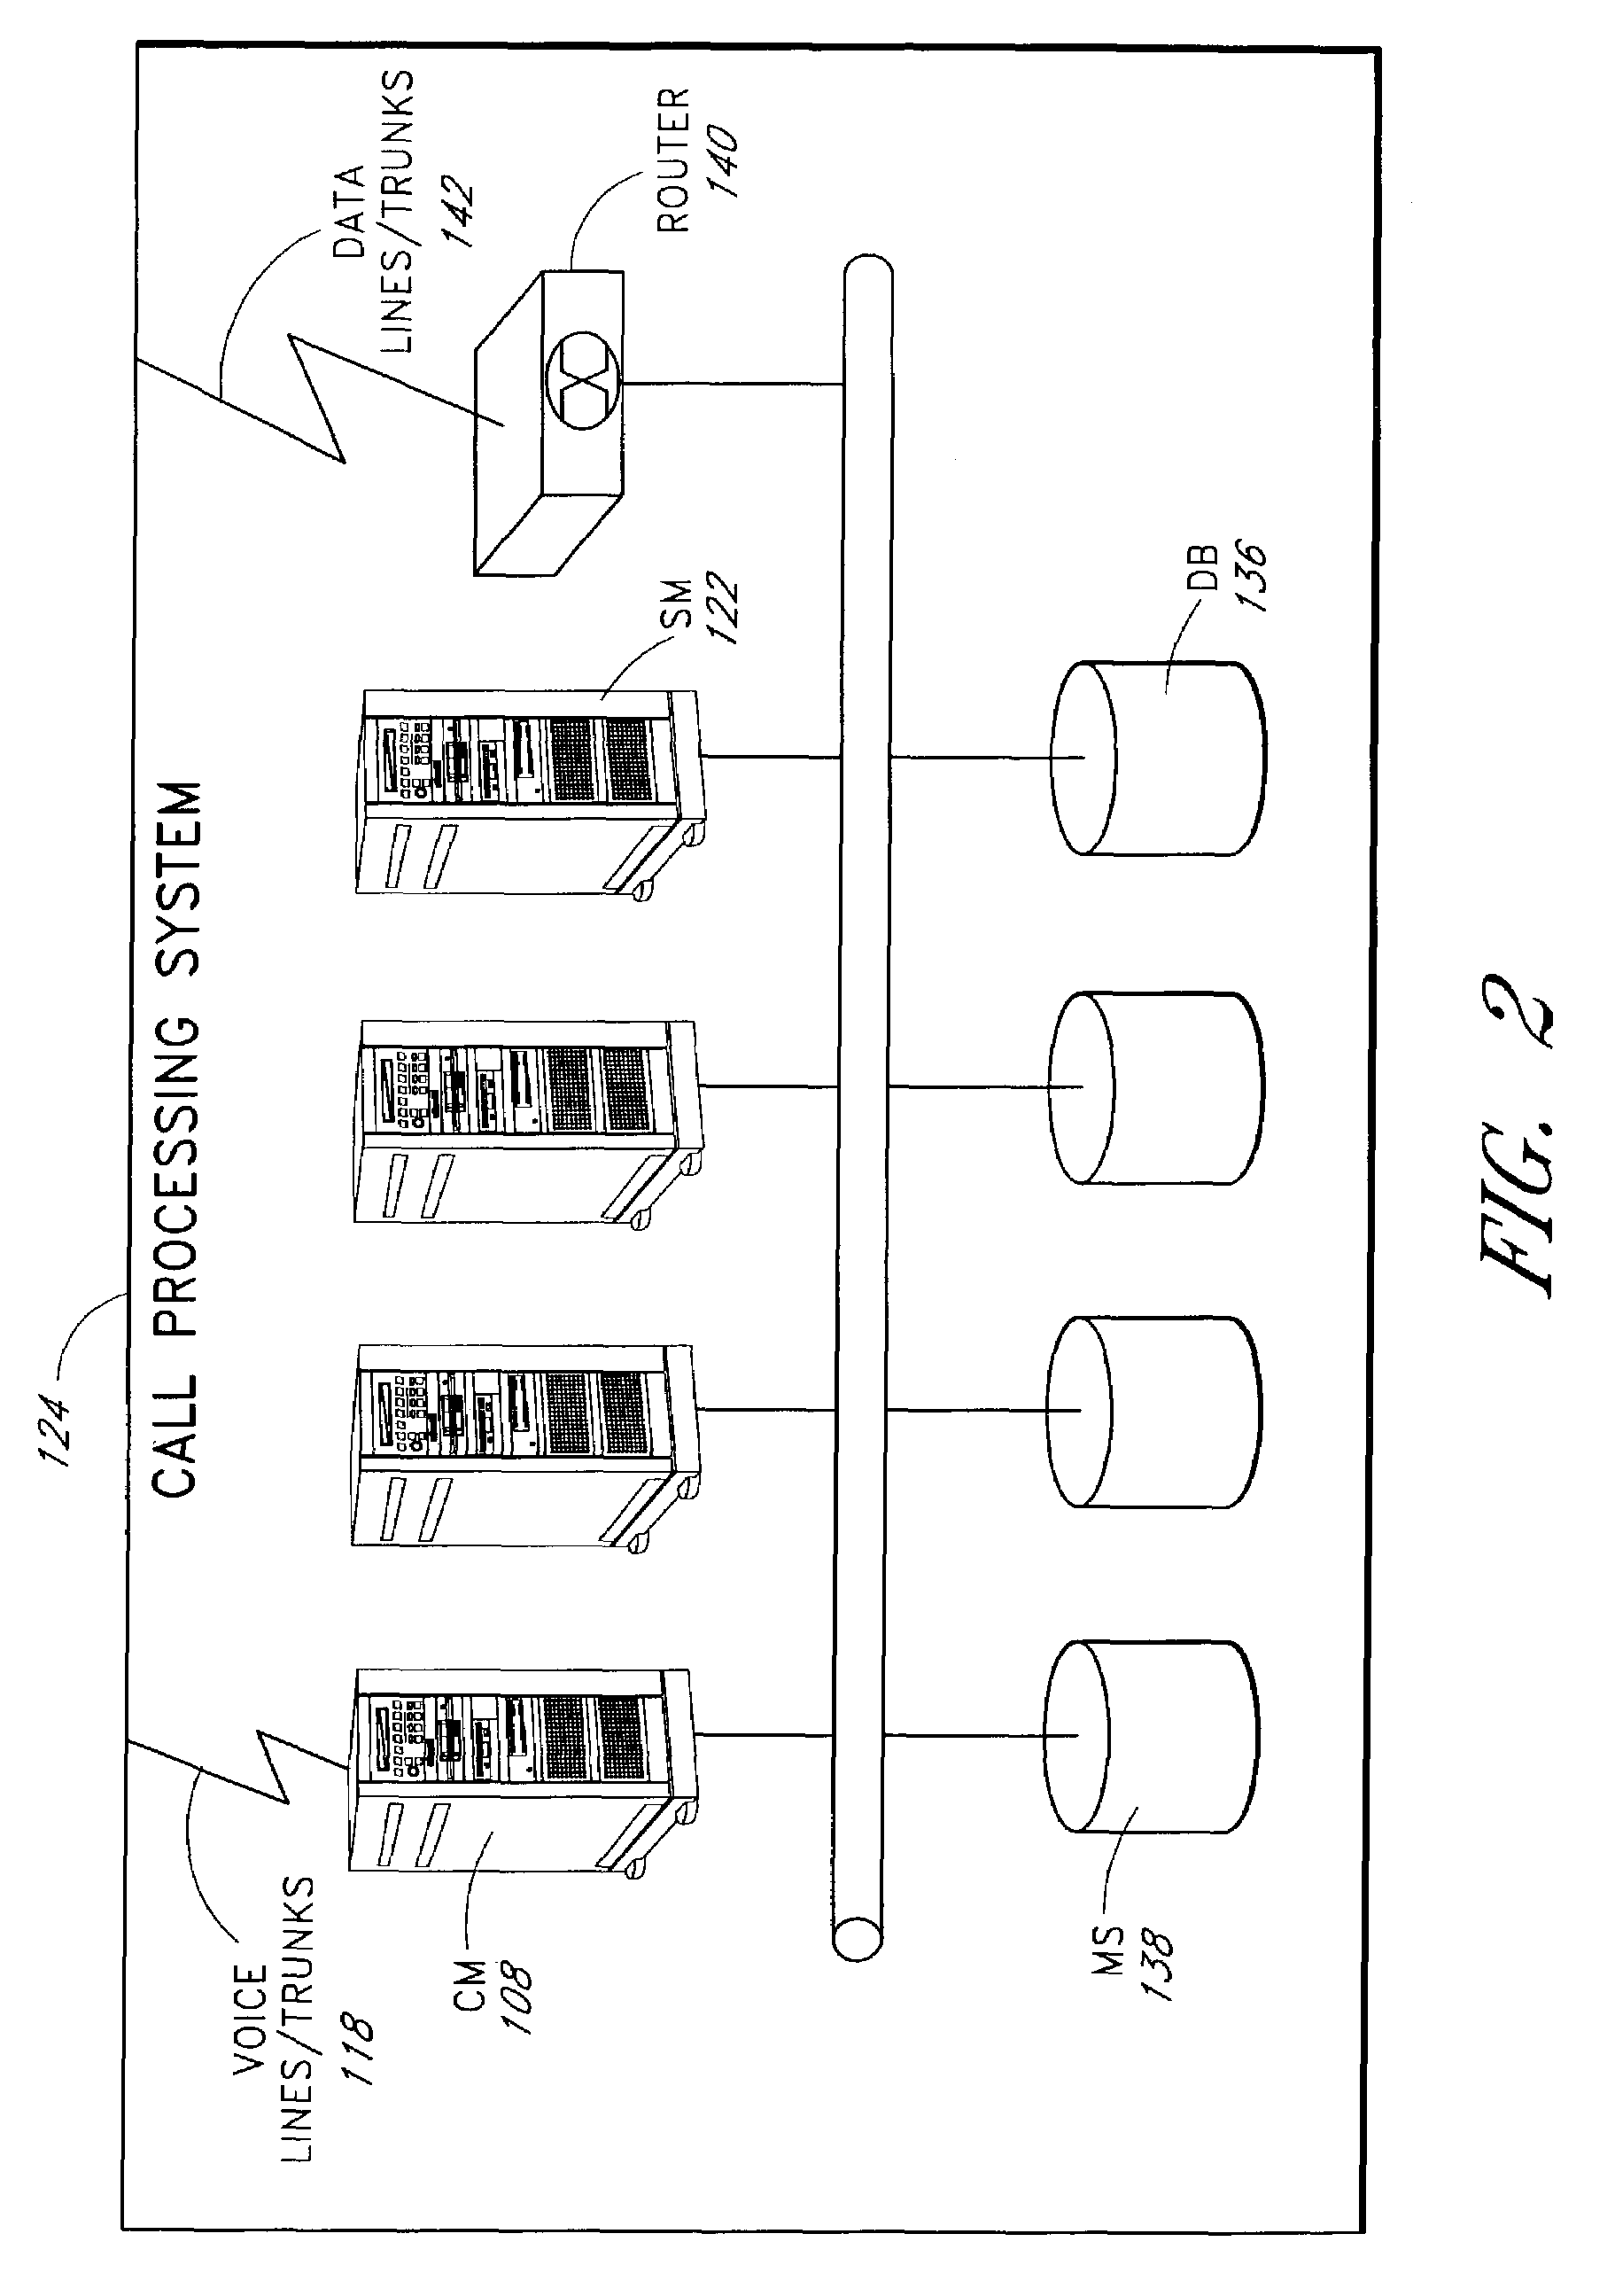 Systems and methods for call screening